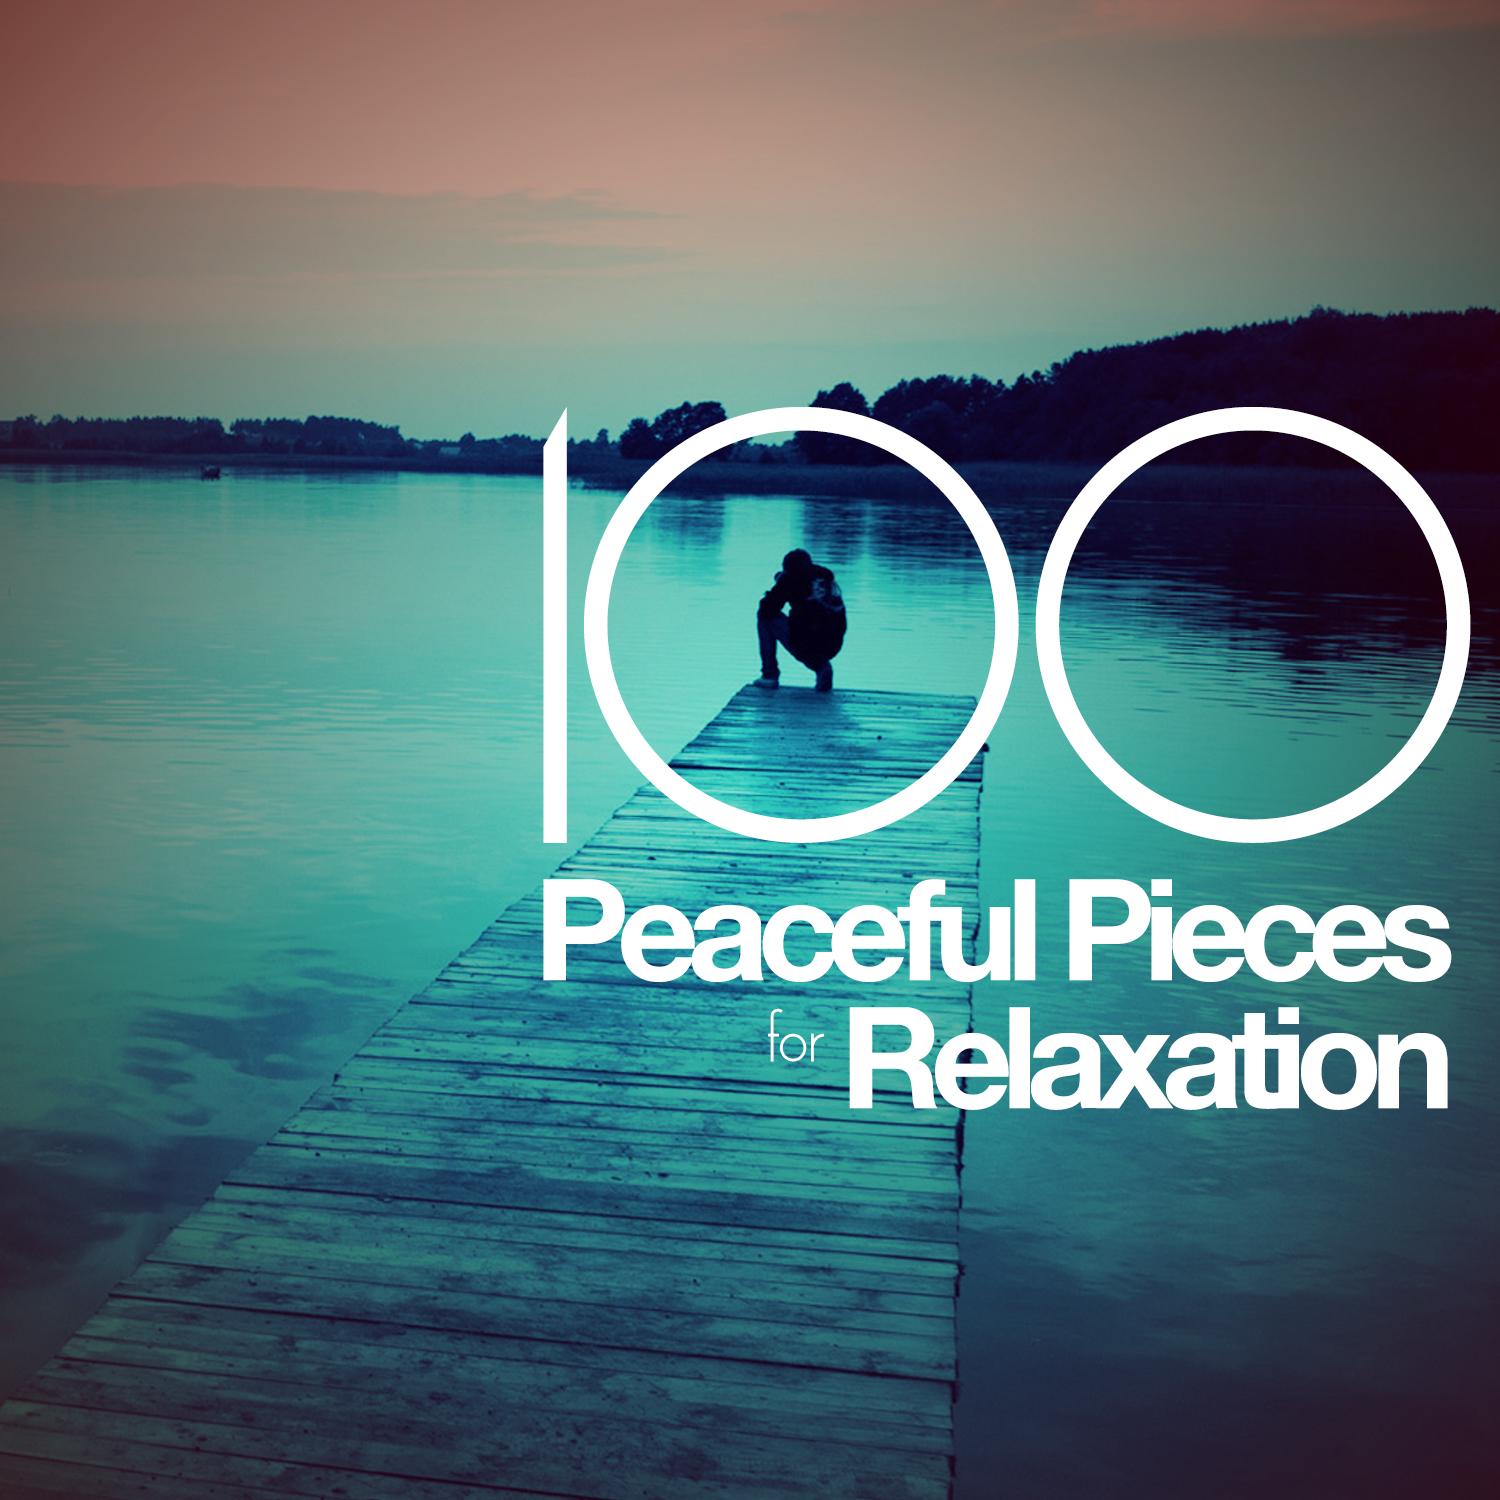 100 Peaceful Pieces for Relaxation